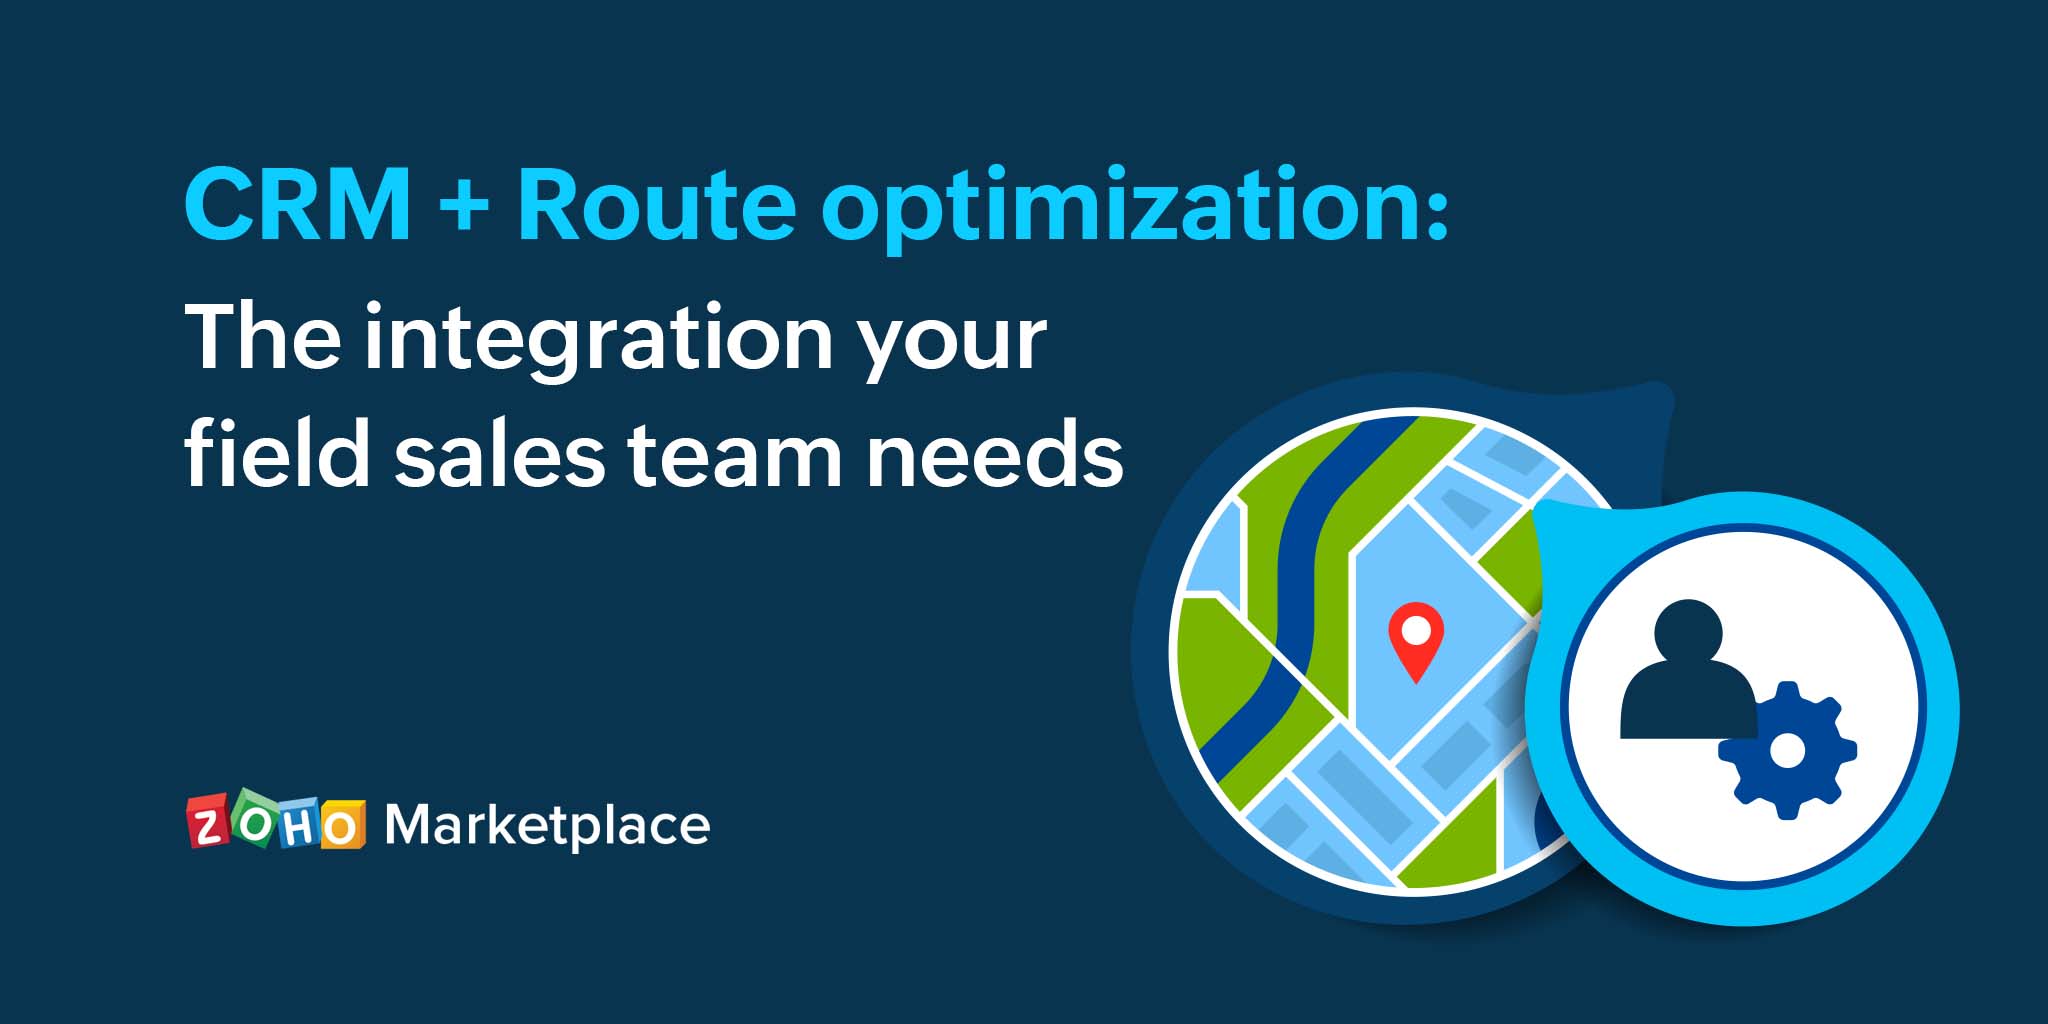 CRM + Route optimization: The integration your field sales team needs